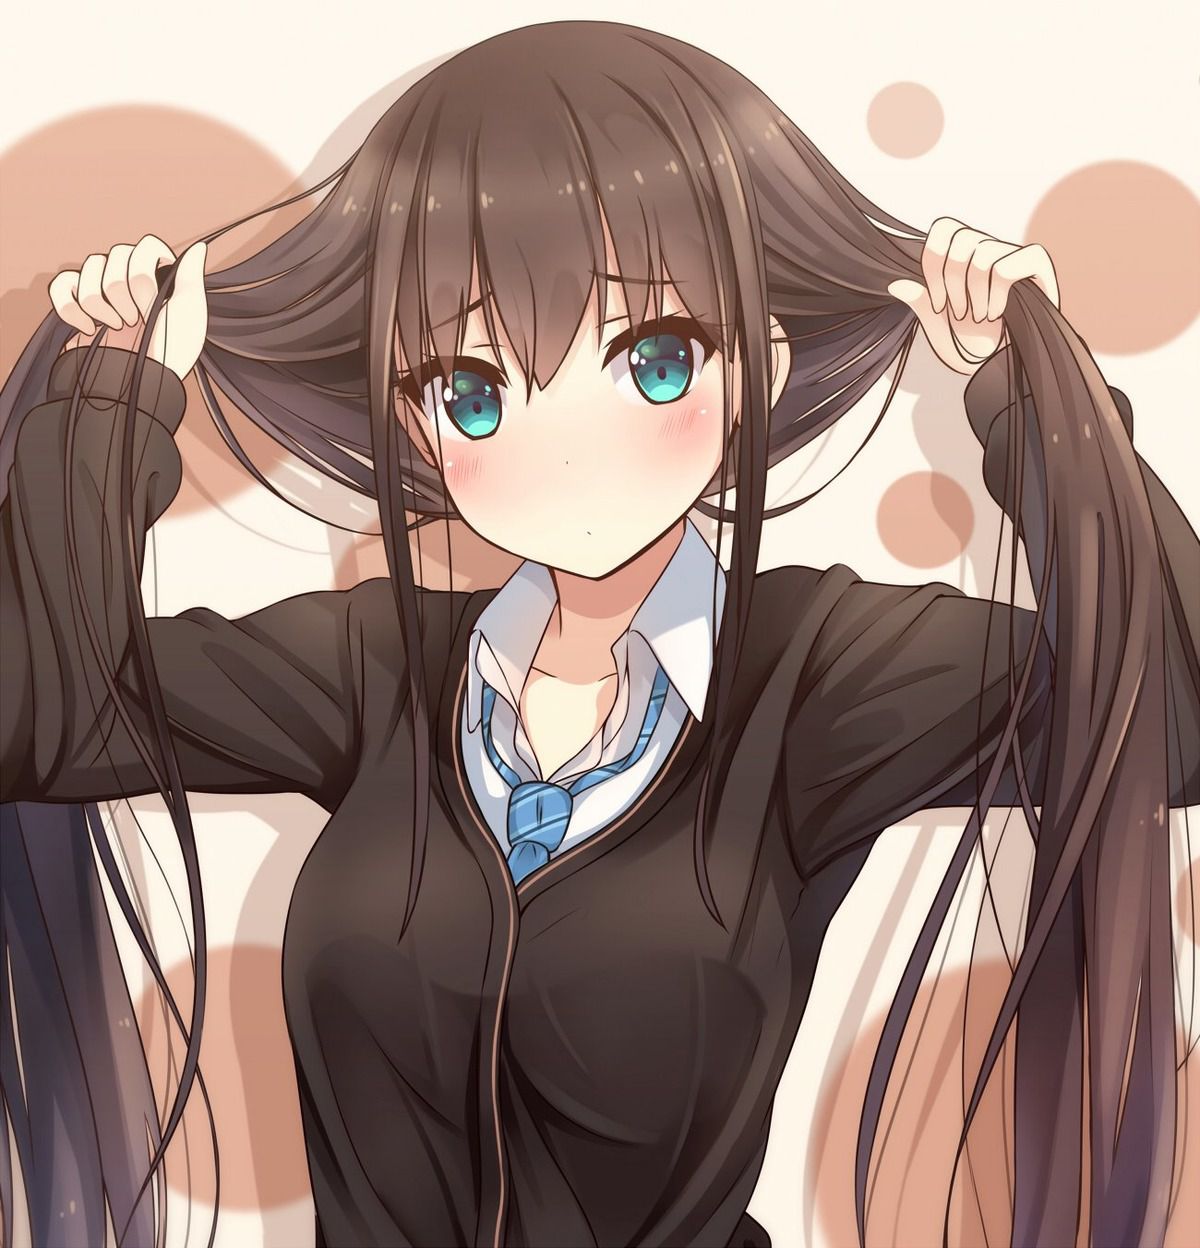 [Deremas] Shibuya Rin-CHAN's cool cute six uniforms, swimwear, etc! [Pictures and wallpapers] (The idolmaster 14) 3